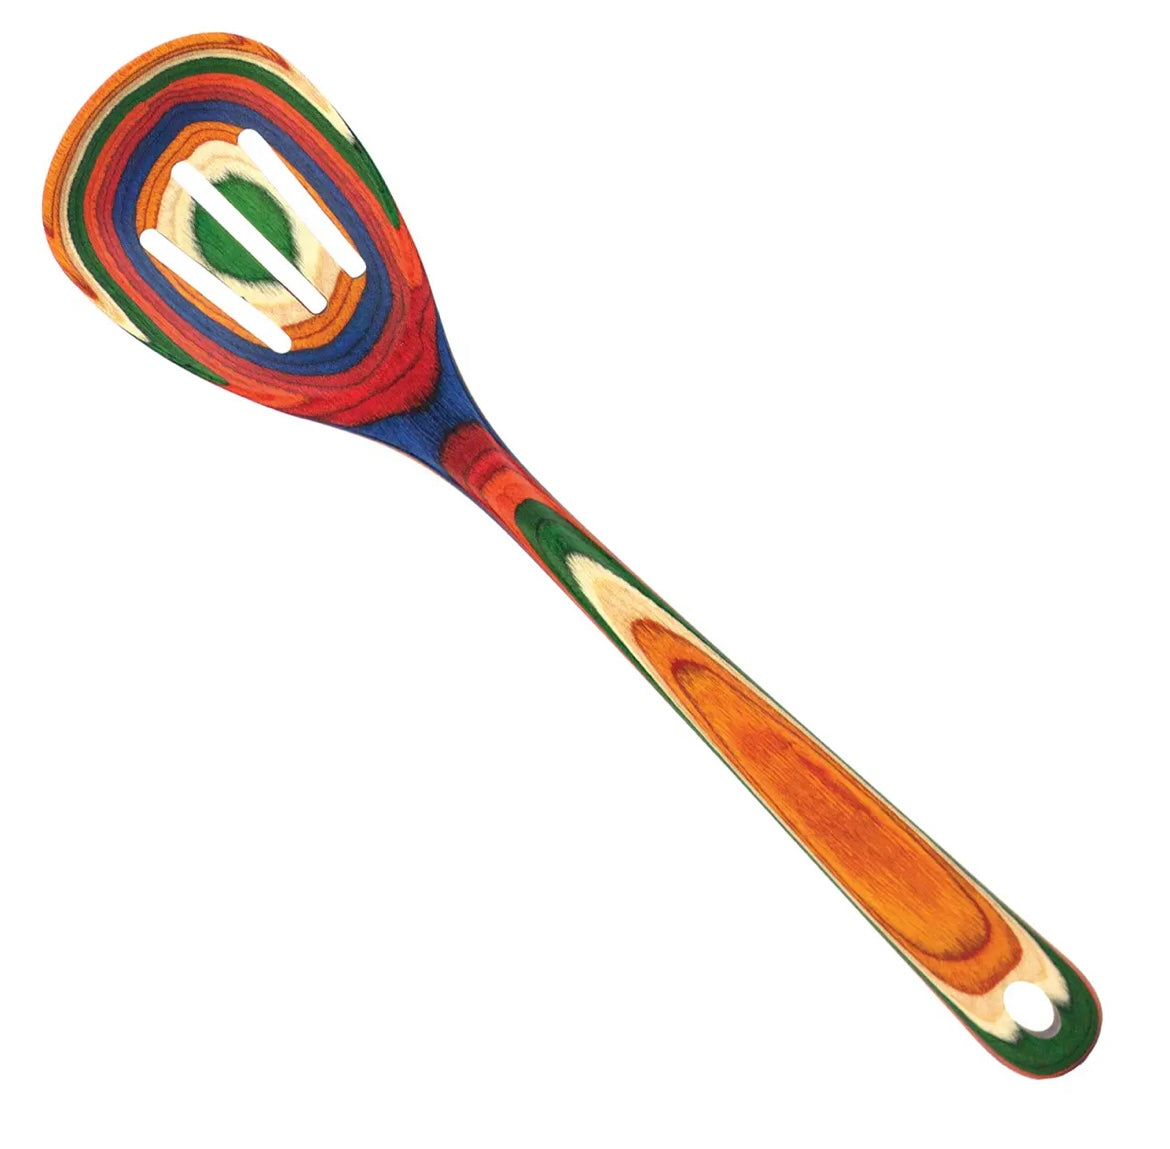 Marrakesh Slotted Spoon